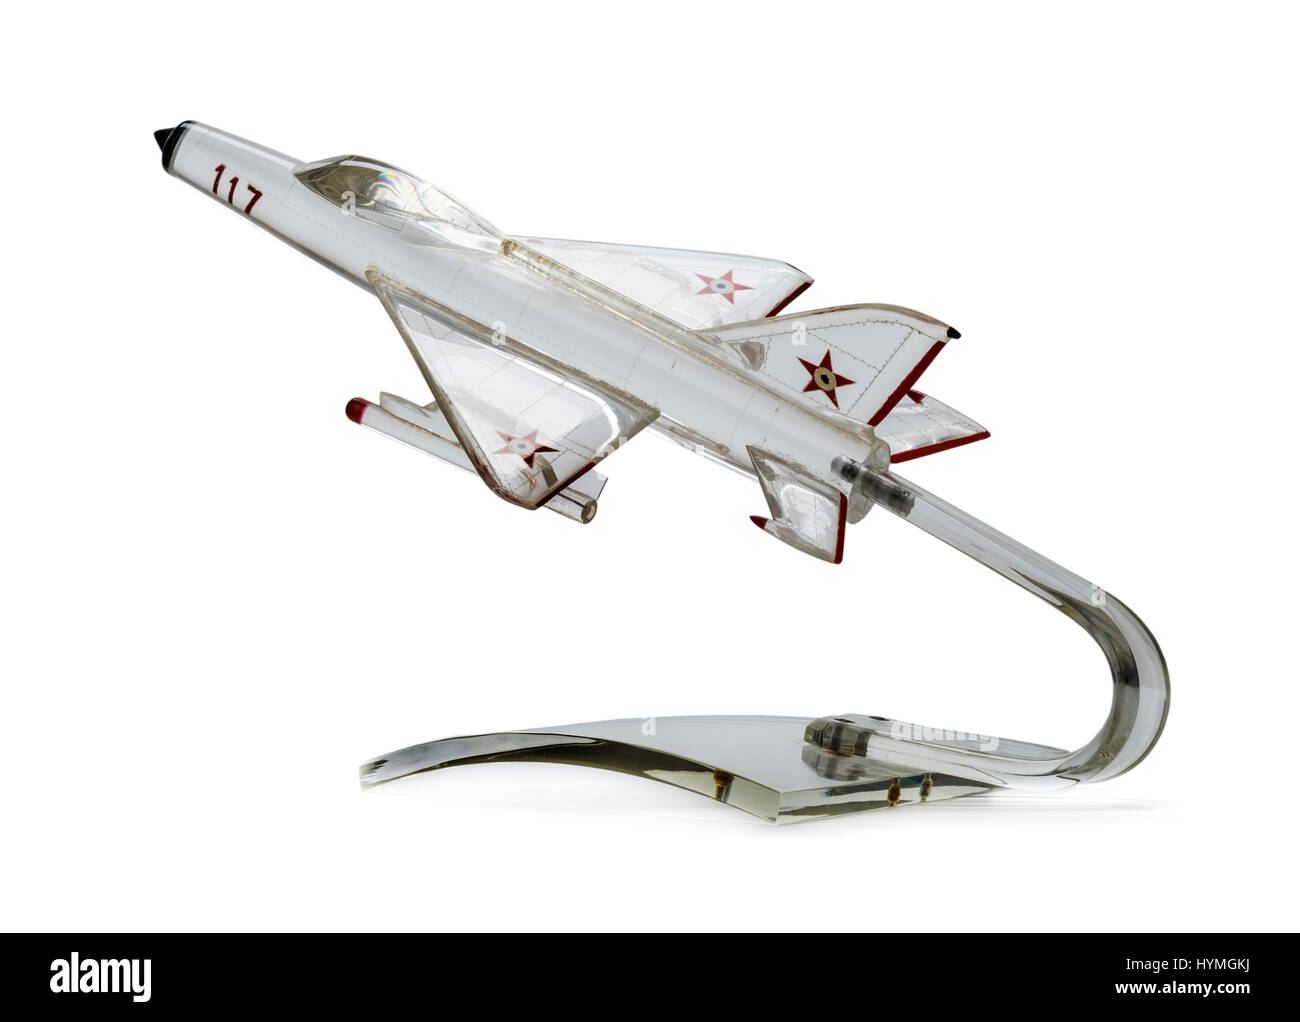 Vintage 1950s or 1960s perspex Russian Air Force desktop model of a MIG 21 fighter aircraft Stock Photo